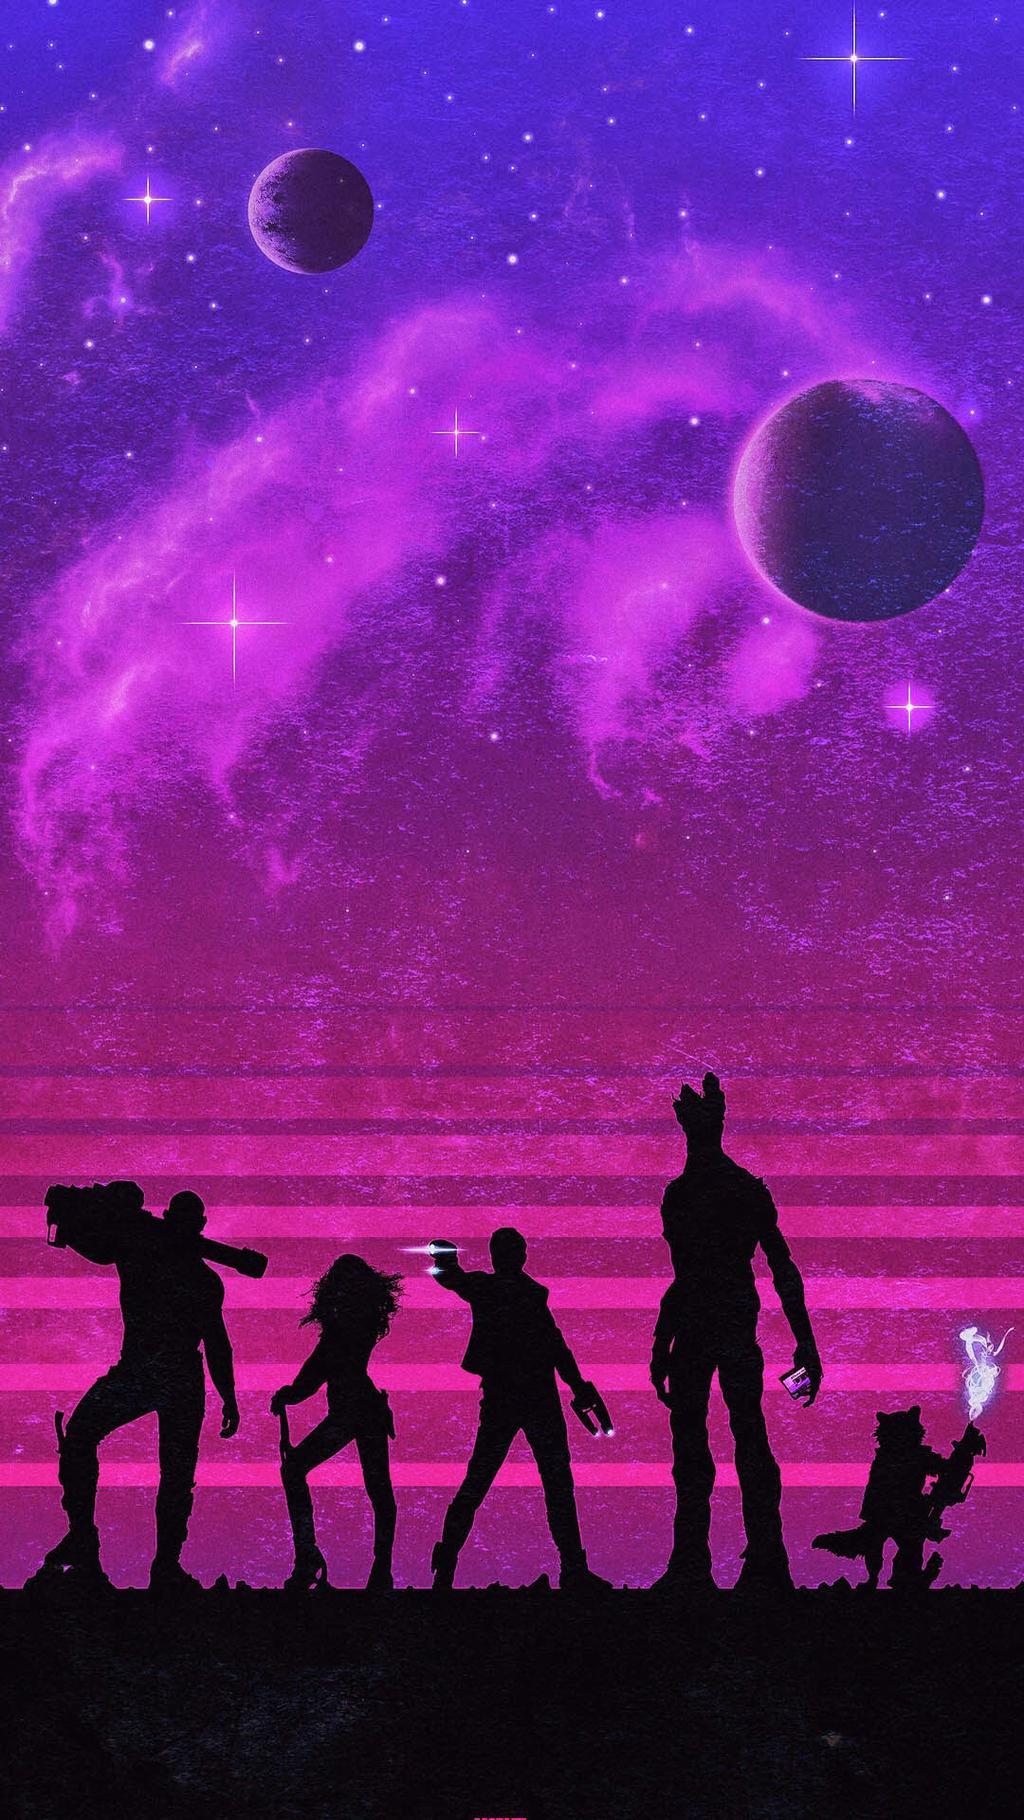 Guardians Of The Galaxy Iphone Wallpapers Top Free Guardians Of The Galaxy Iphone Backgrounds Wallpaperaccess